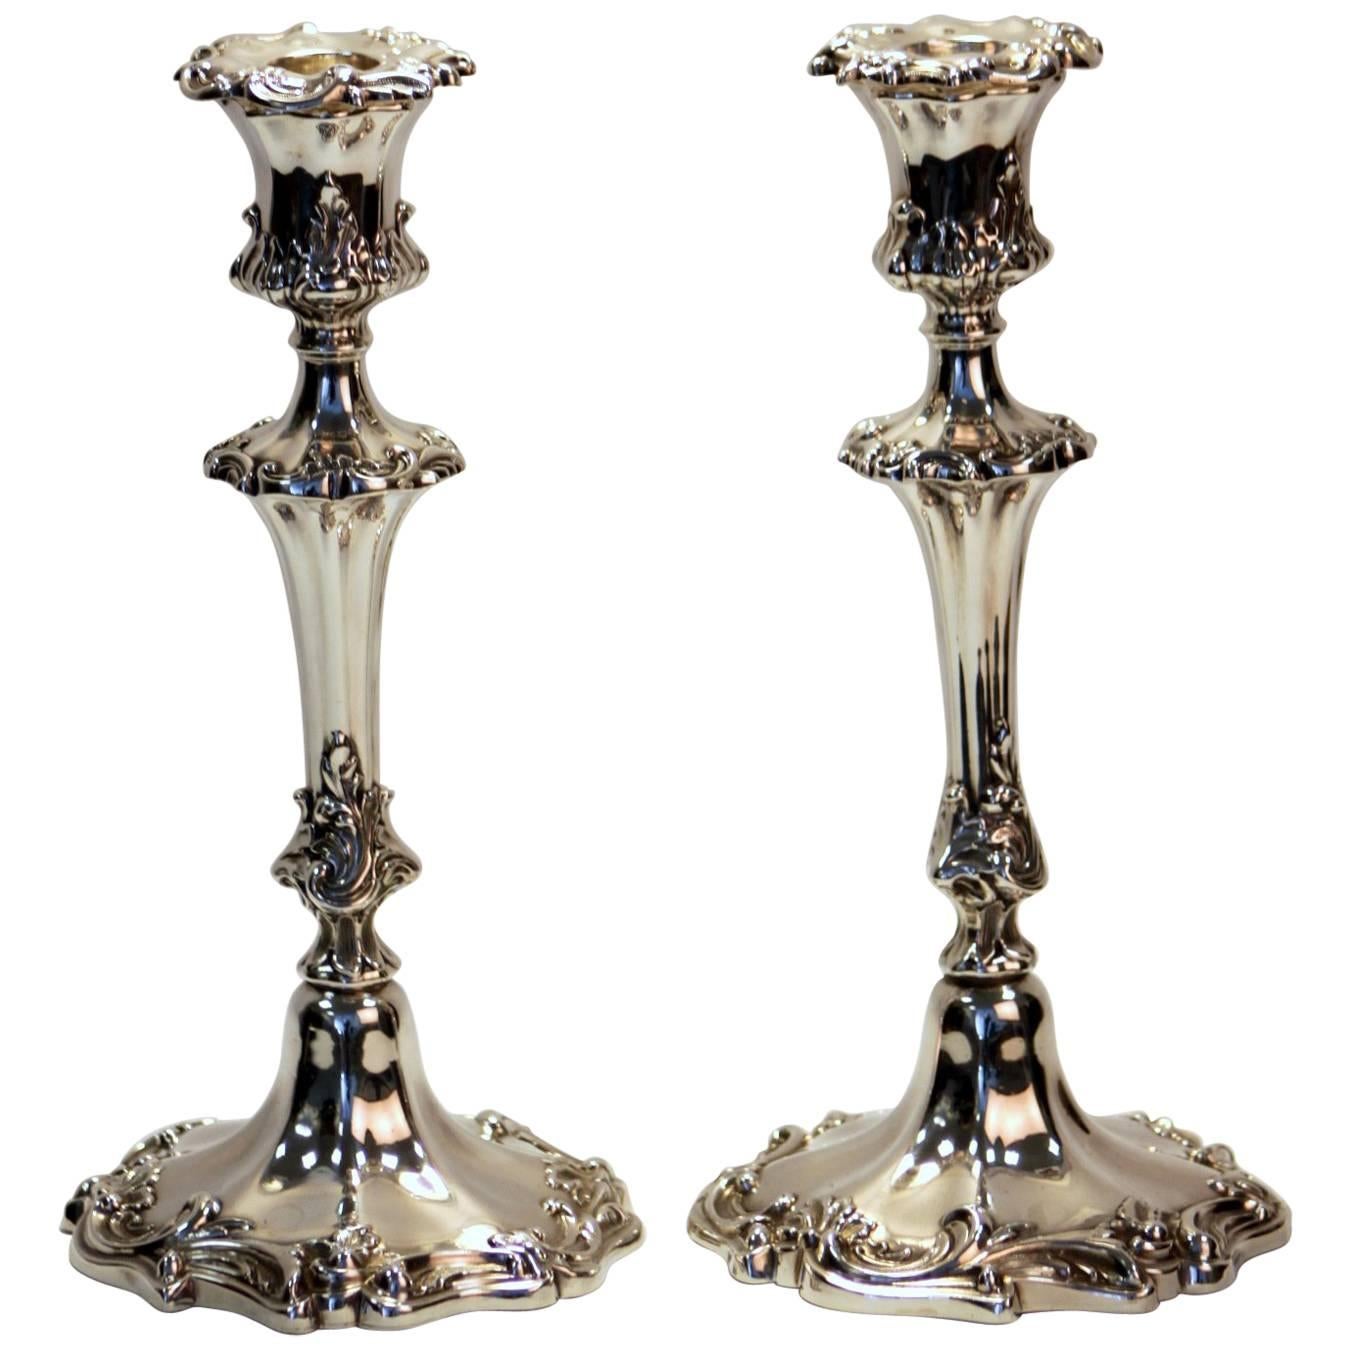 Victorian Filled Silver Candlesticks with Floral Engravings, Sheffield, 1840